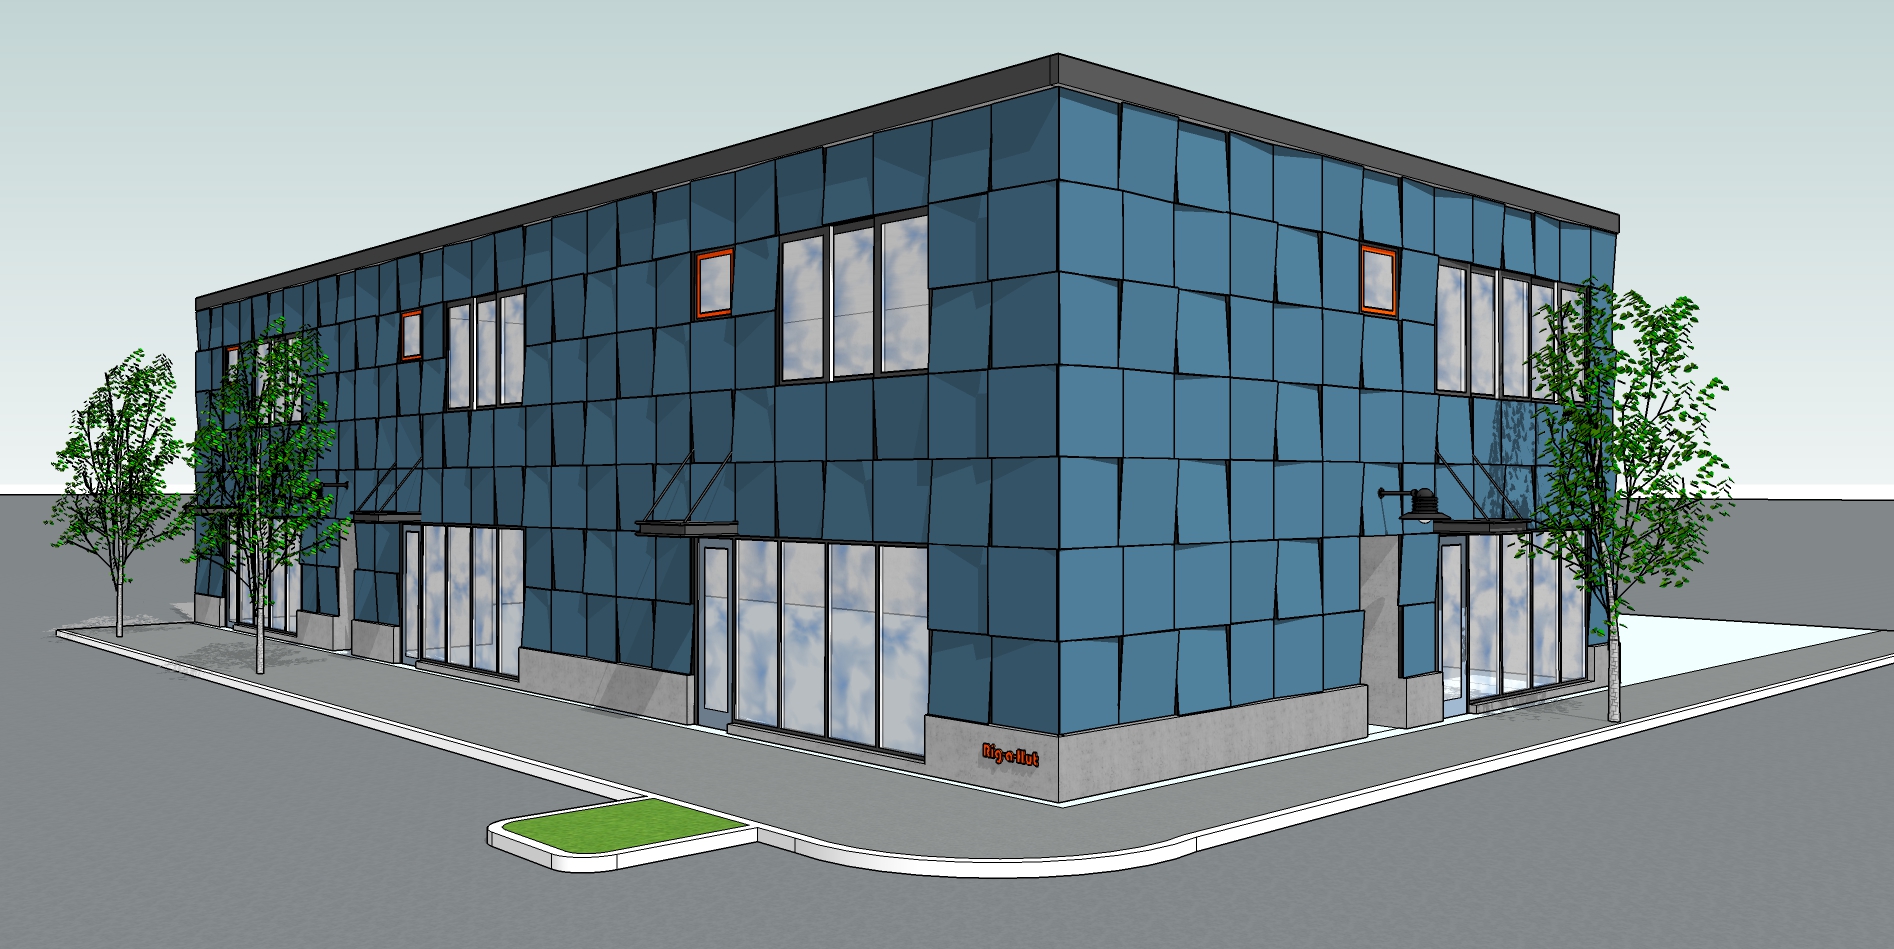 A digital rendering shows what the two-story apartment complex in Washougal may look like when completed.